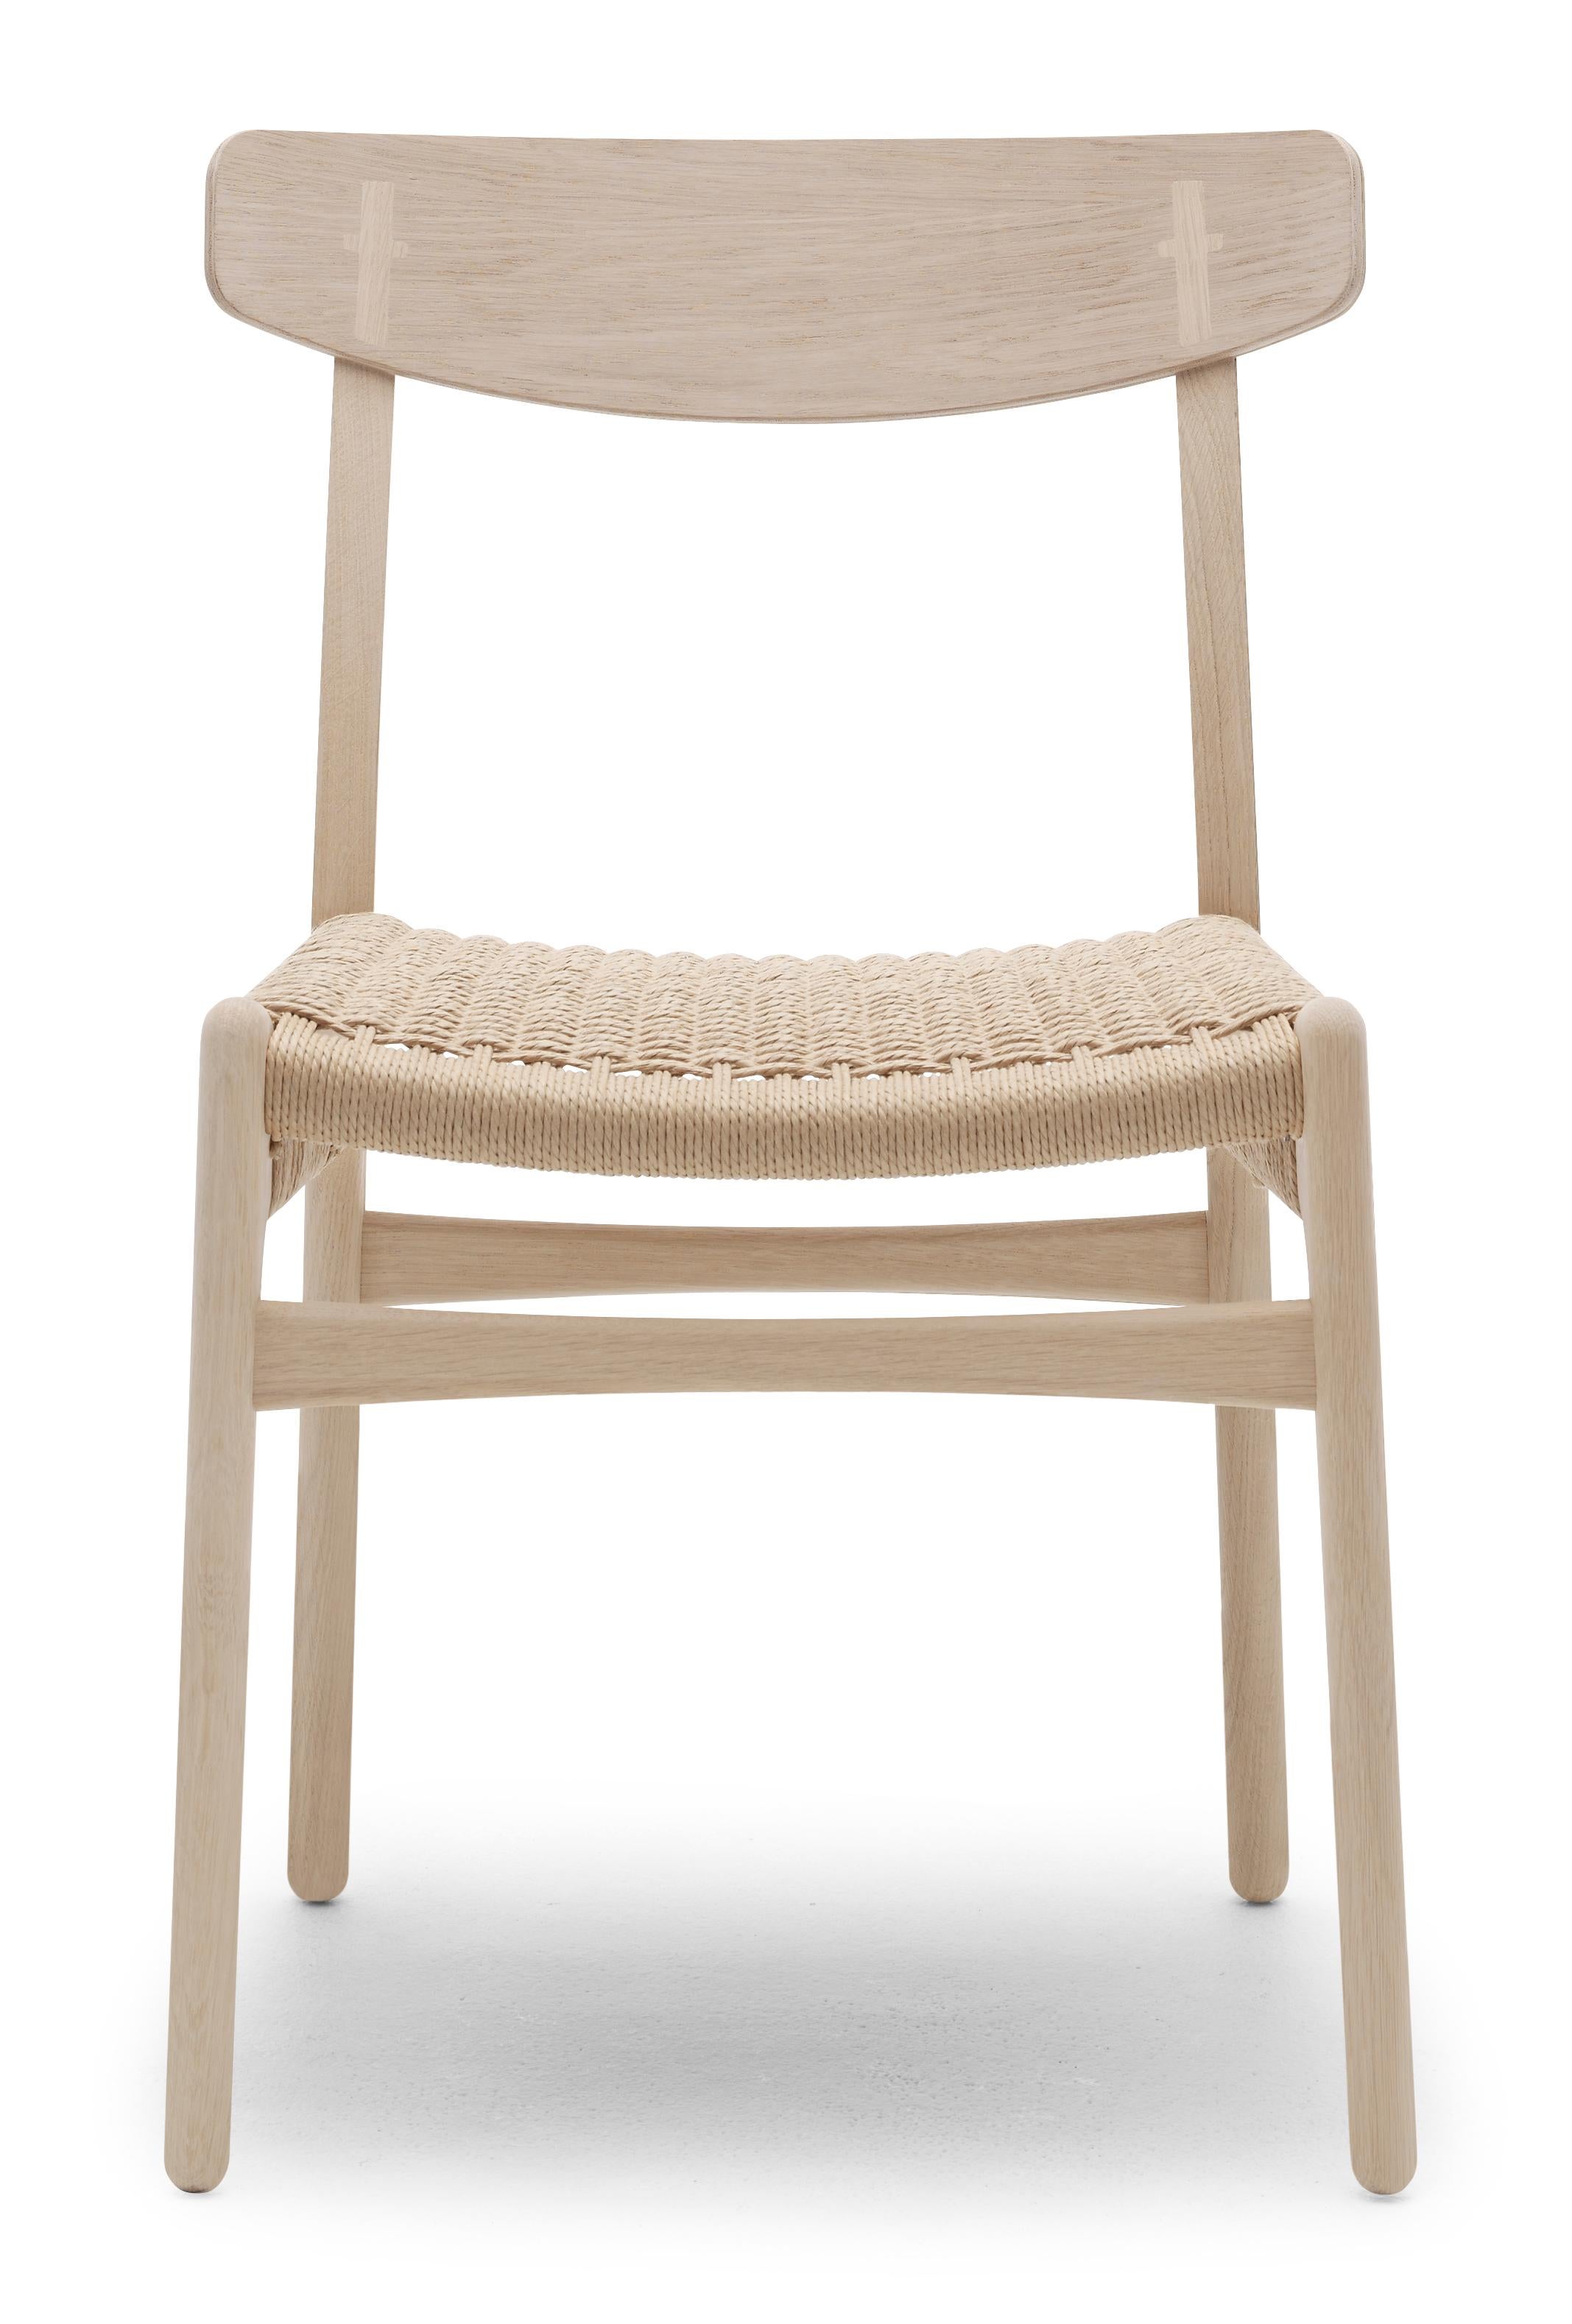 Brown (Oak Soap) CH23 Dining Chair in Wood Finishes with Natural Papercord Seat by Hans J. Wegner